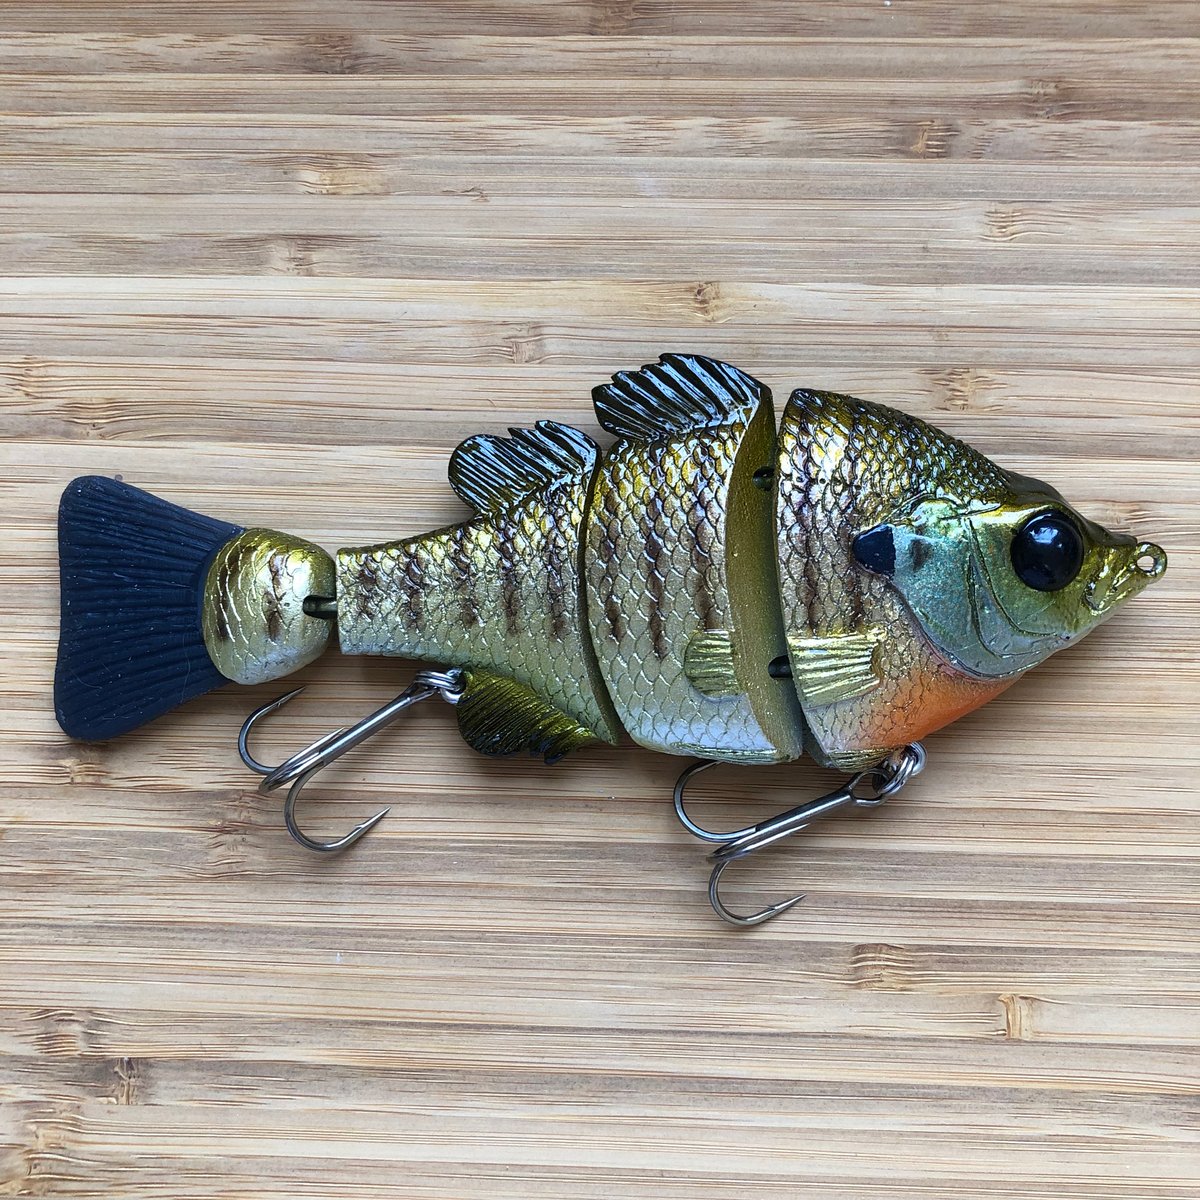 https://assets.bigcartel.com/product_images/355193608/The+Snack+Size+Bluegill+%7C+Golden+Spring+Gill.jpg?auto=format&fit=max&h=1200&w=1200